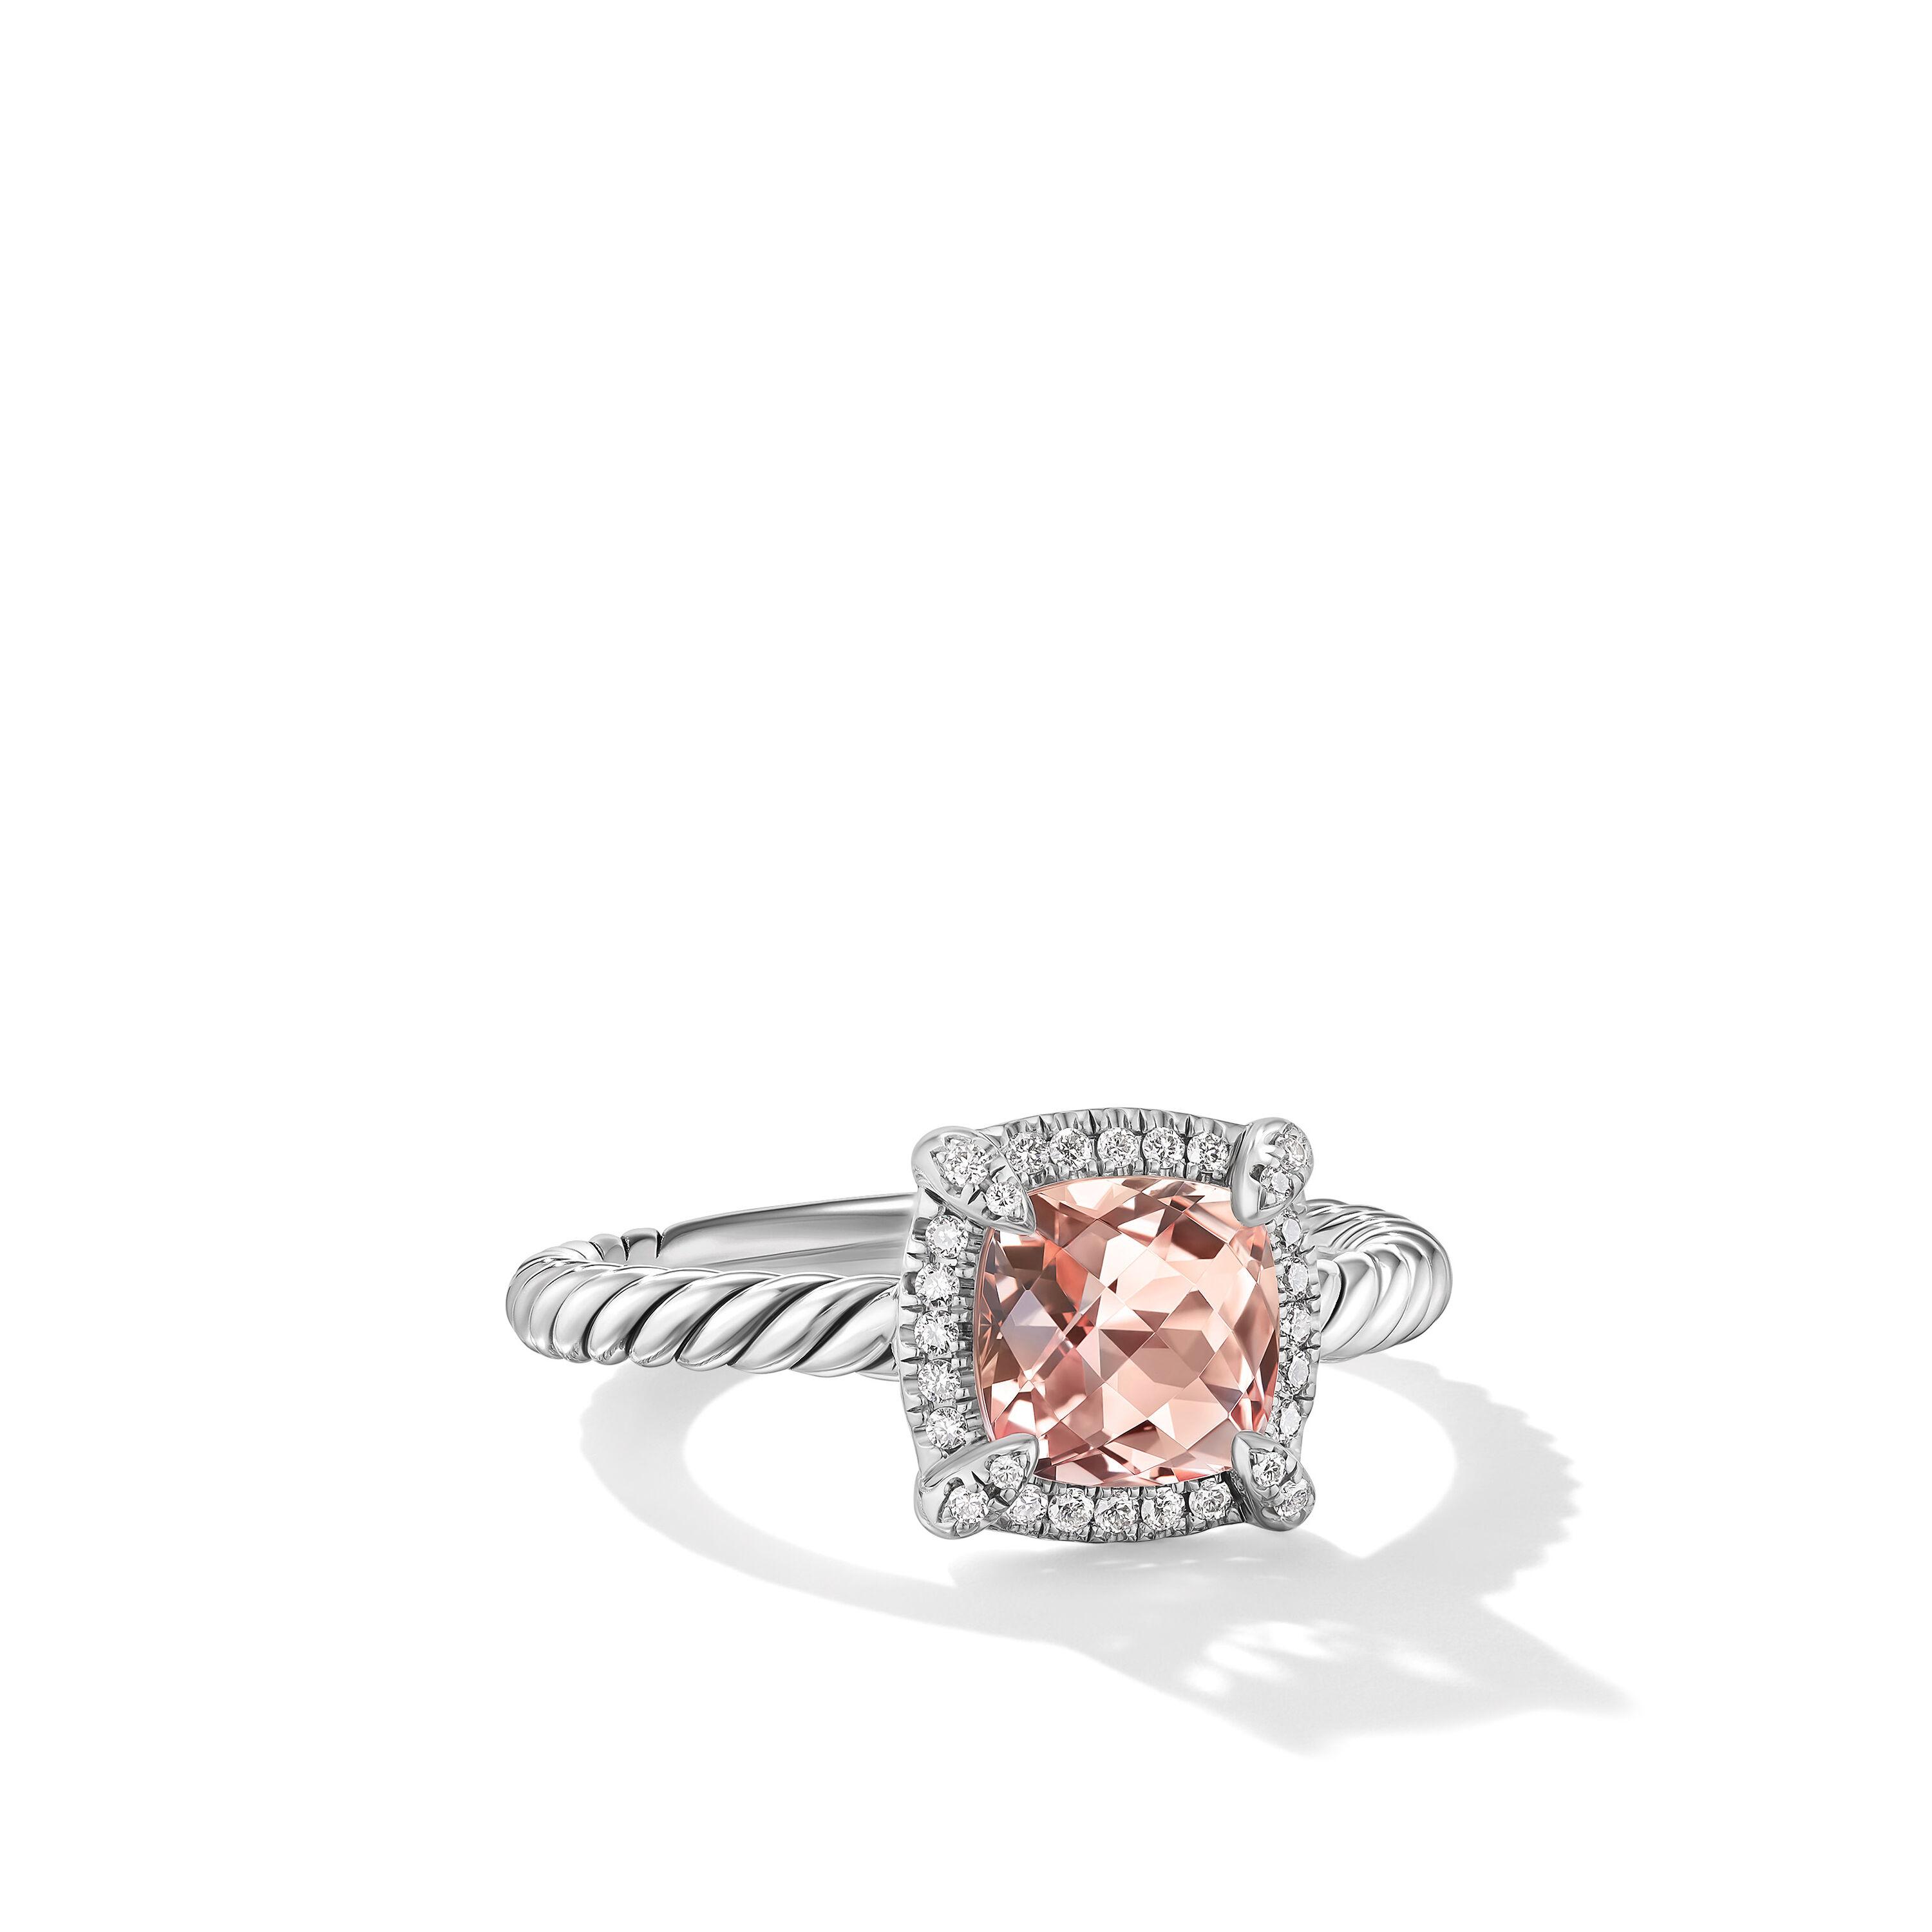 David Yurman Petite Chatelaine Pave Bezel Ring in Sterling Silver with Morganite and Diamonds, Size 5.5